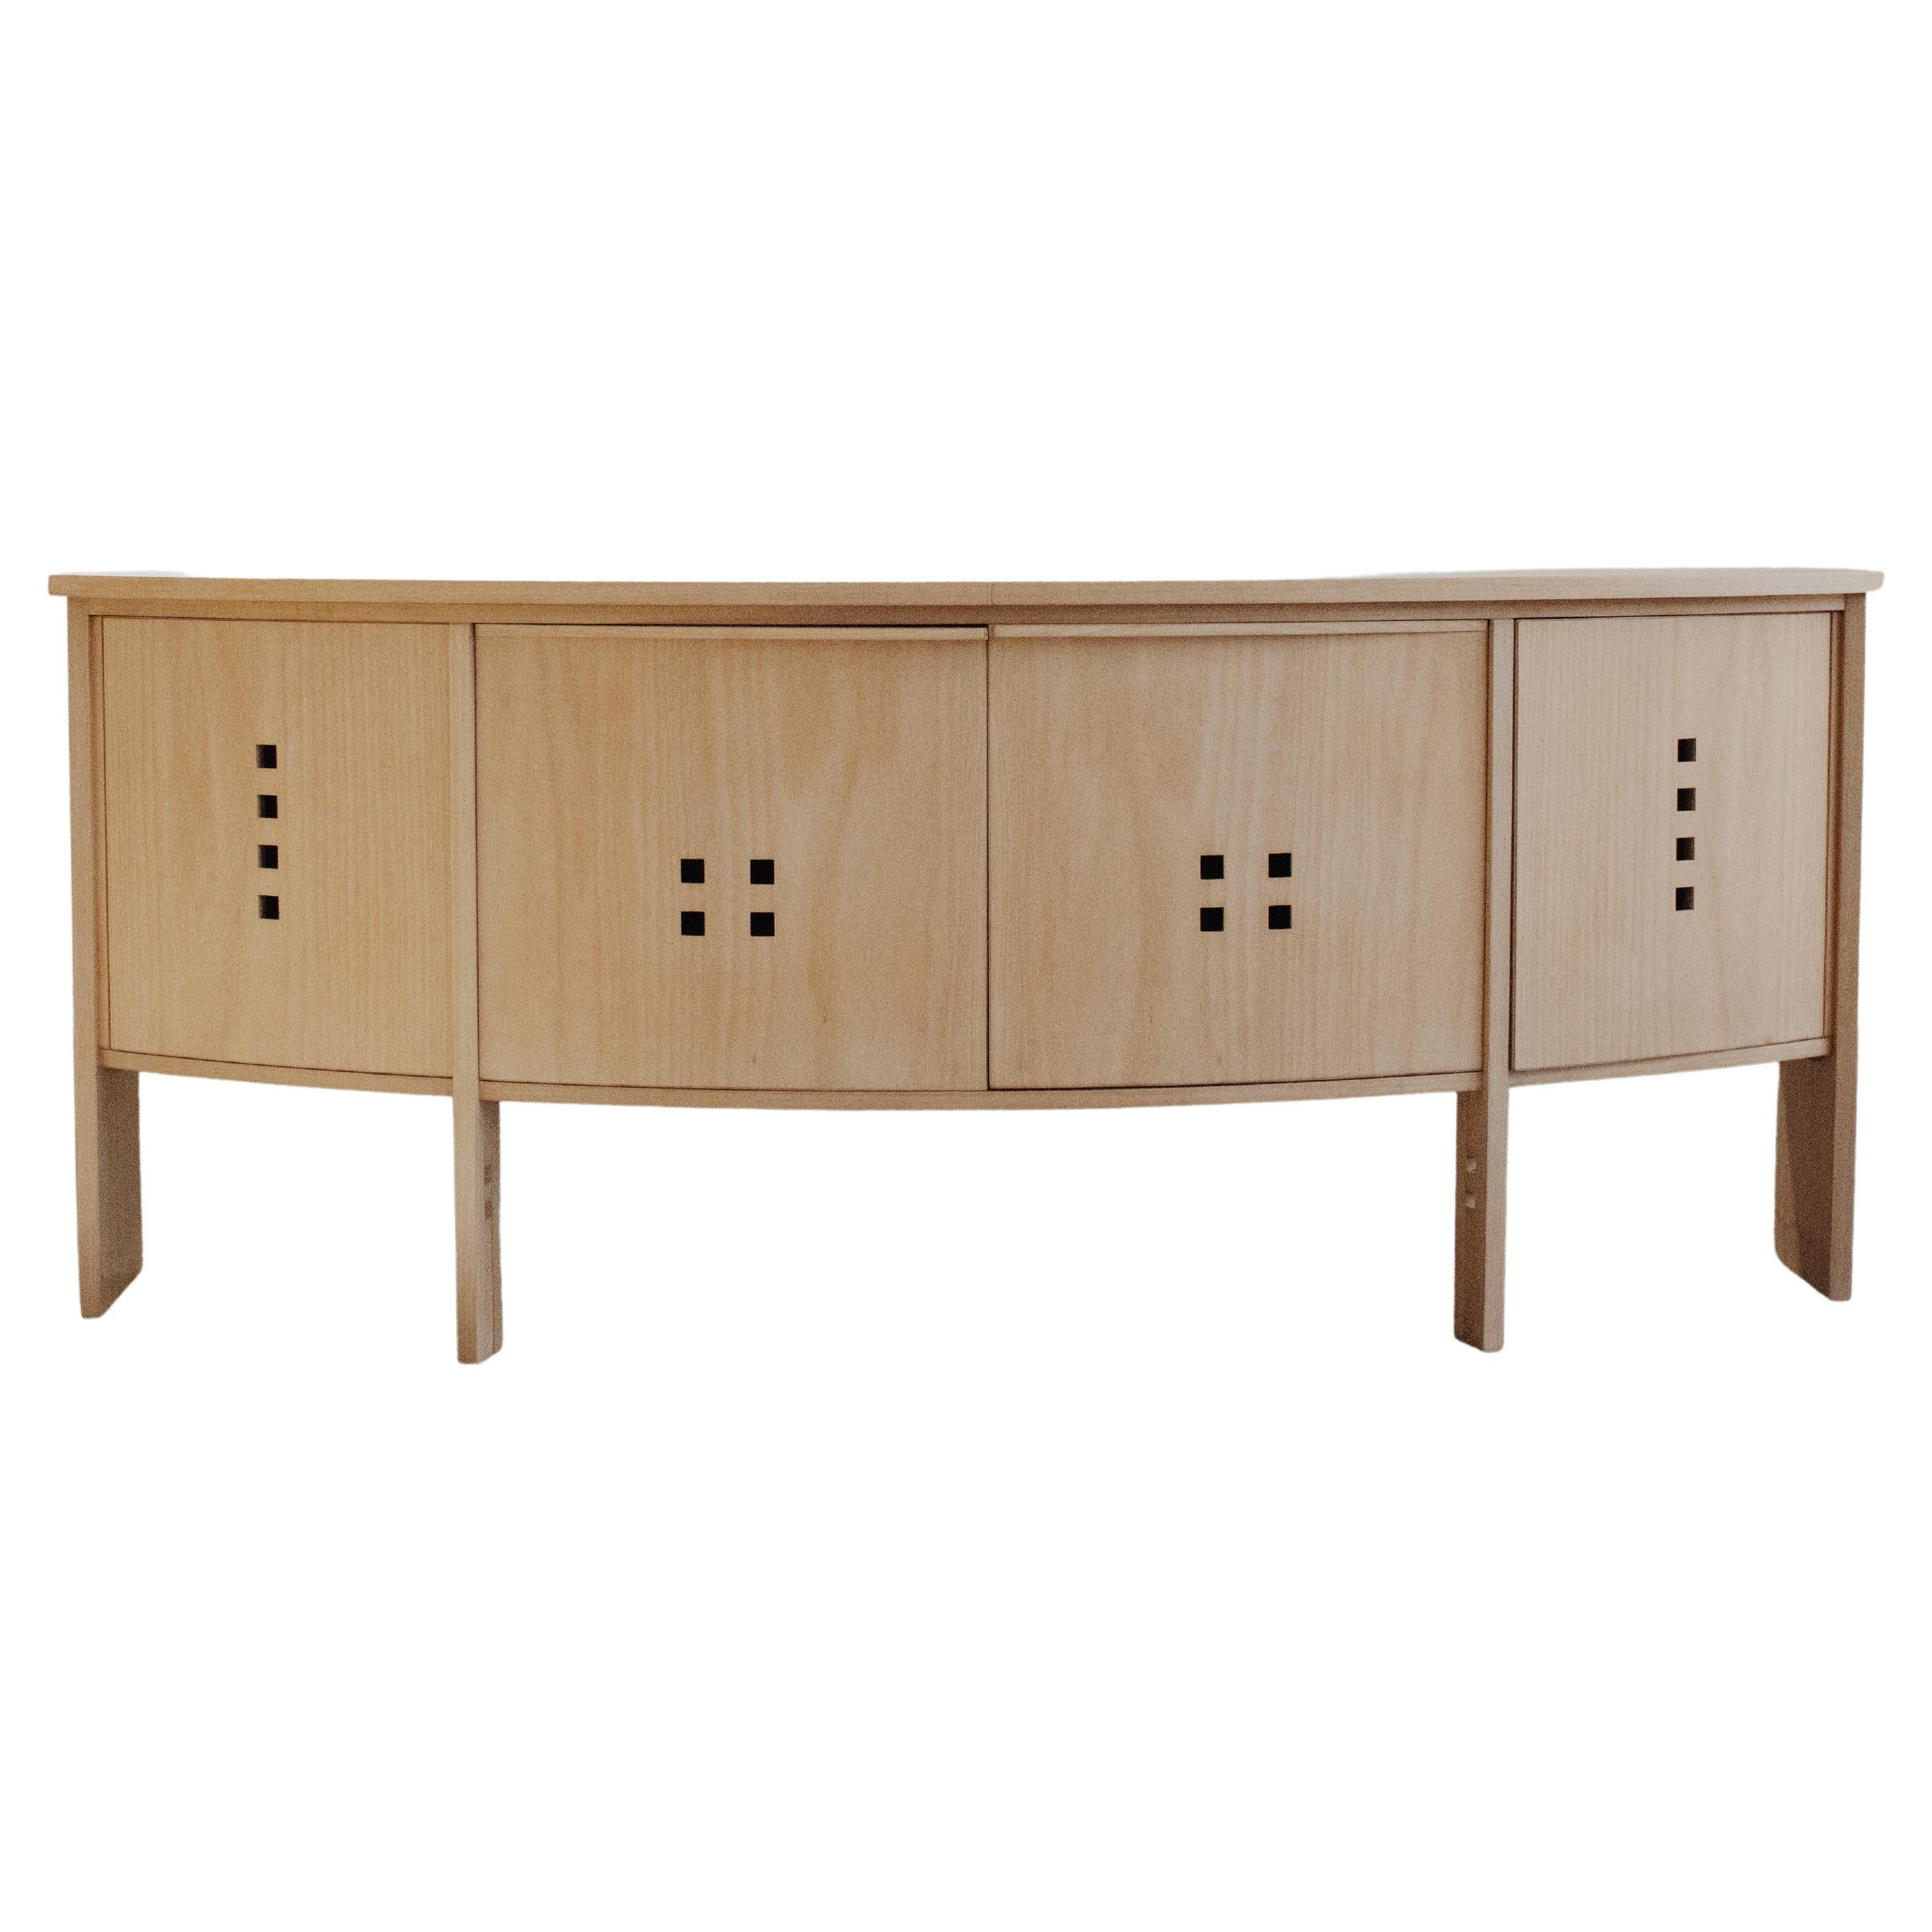 Umberto Asnago Modernist Wooden Sideboard for Giorgetti, 1987